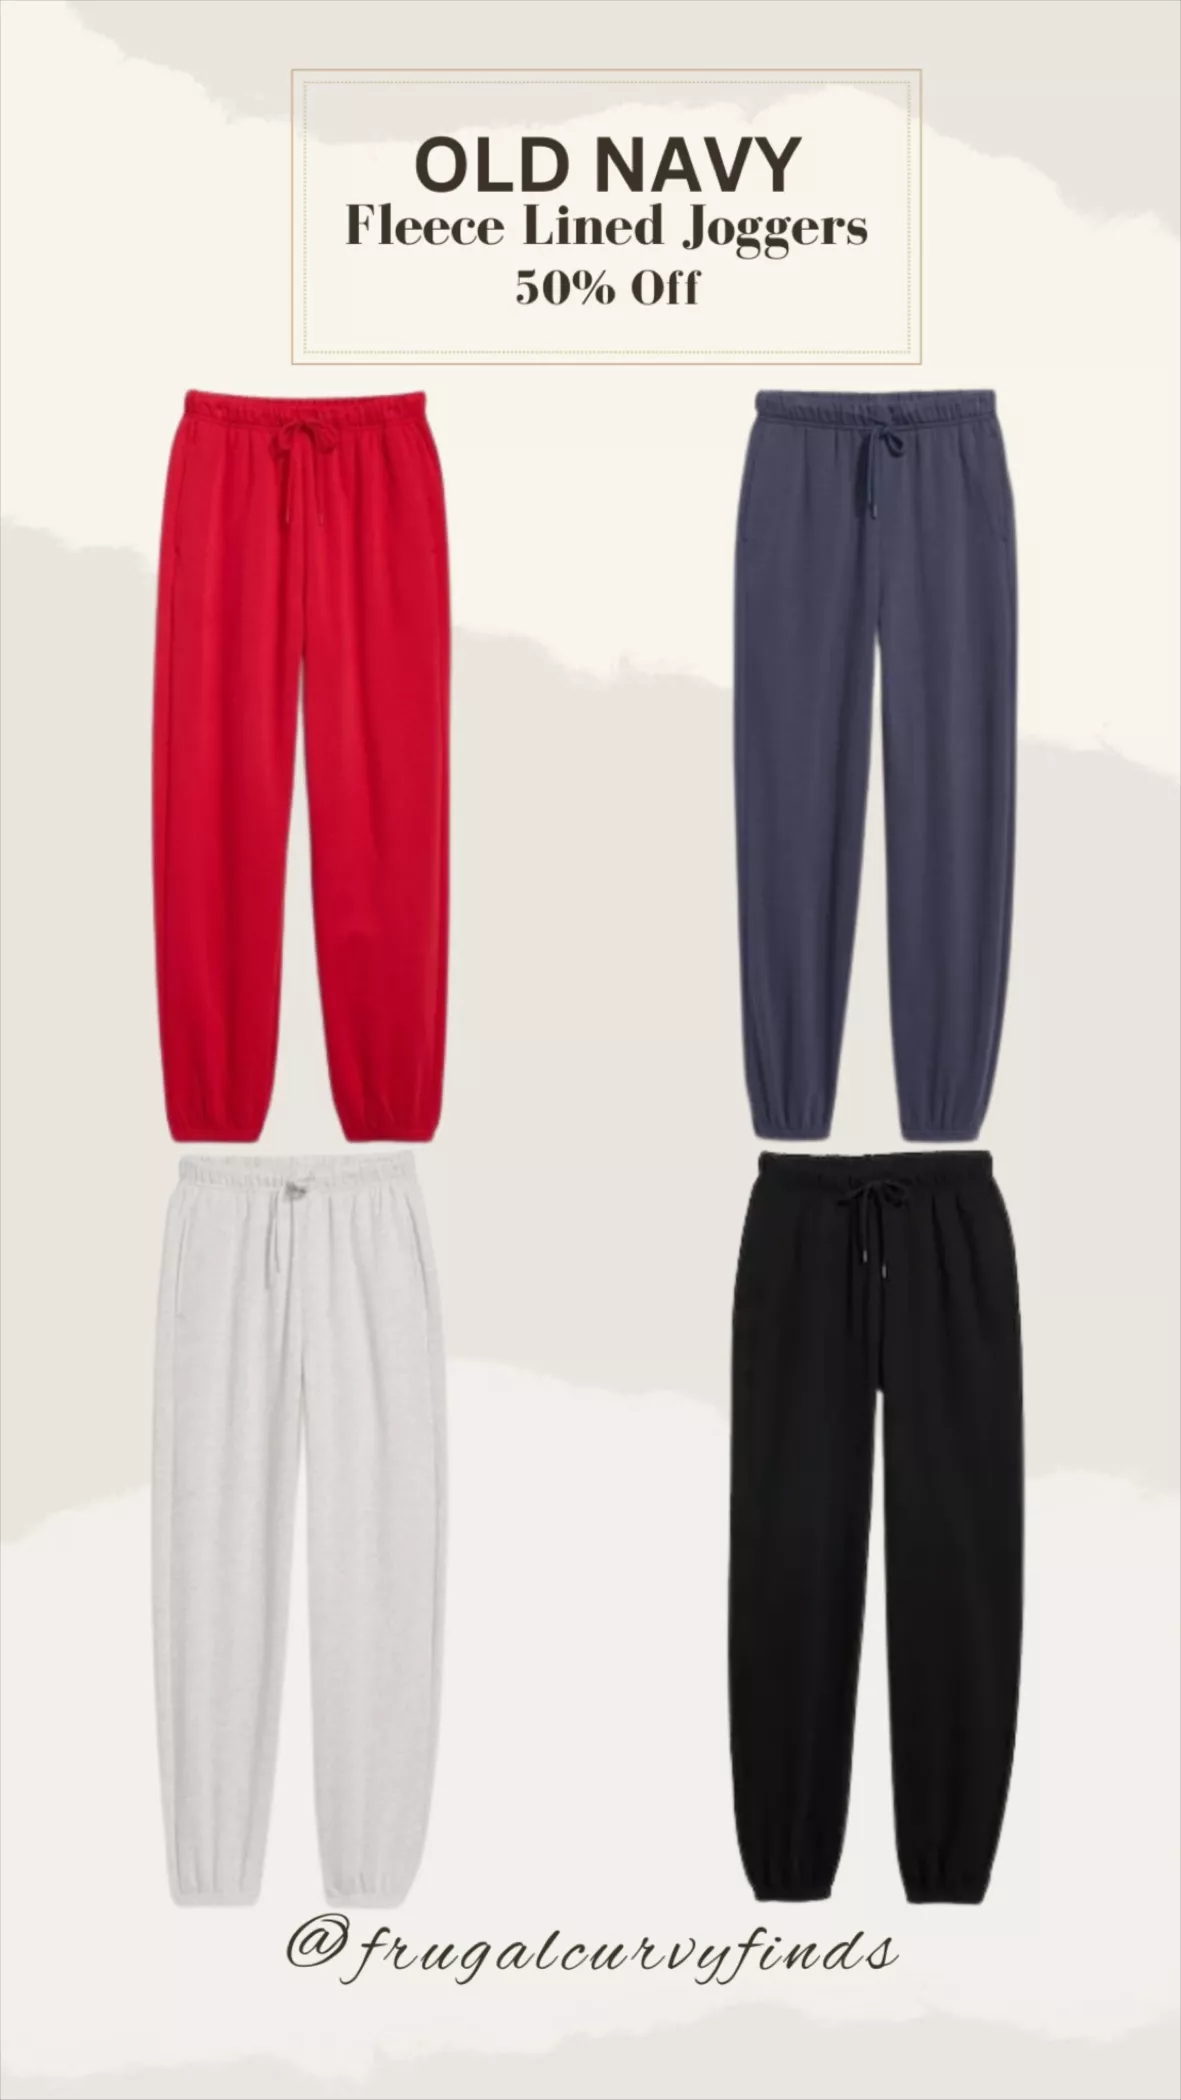 Extra High-Waisted Jogger Sweatpants for Women